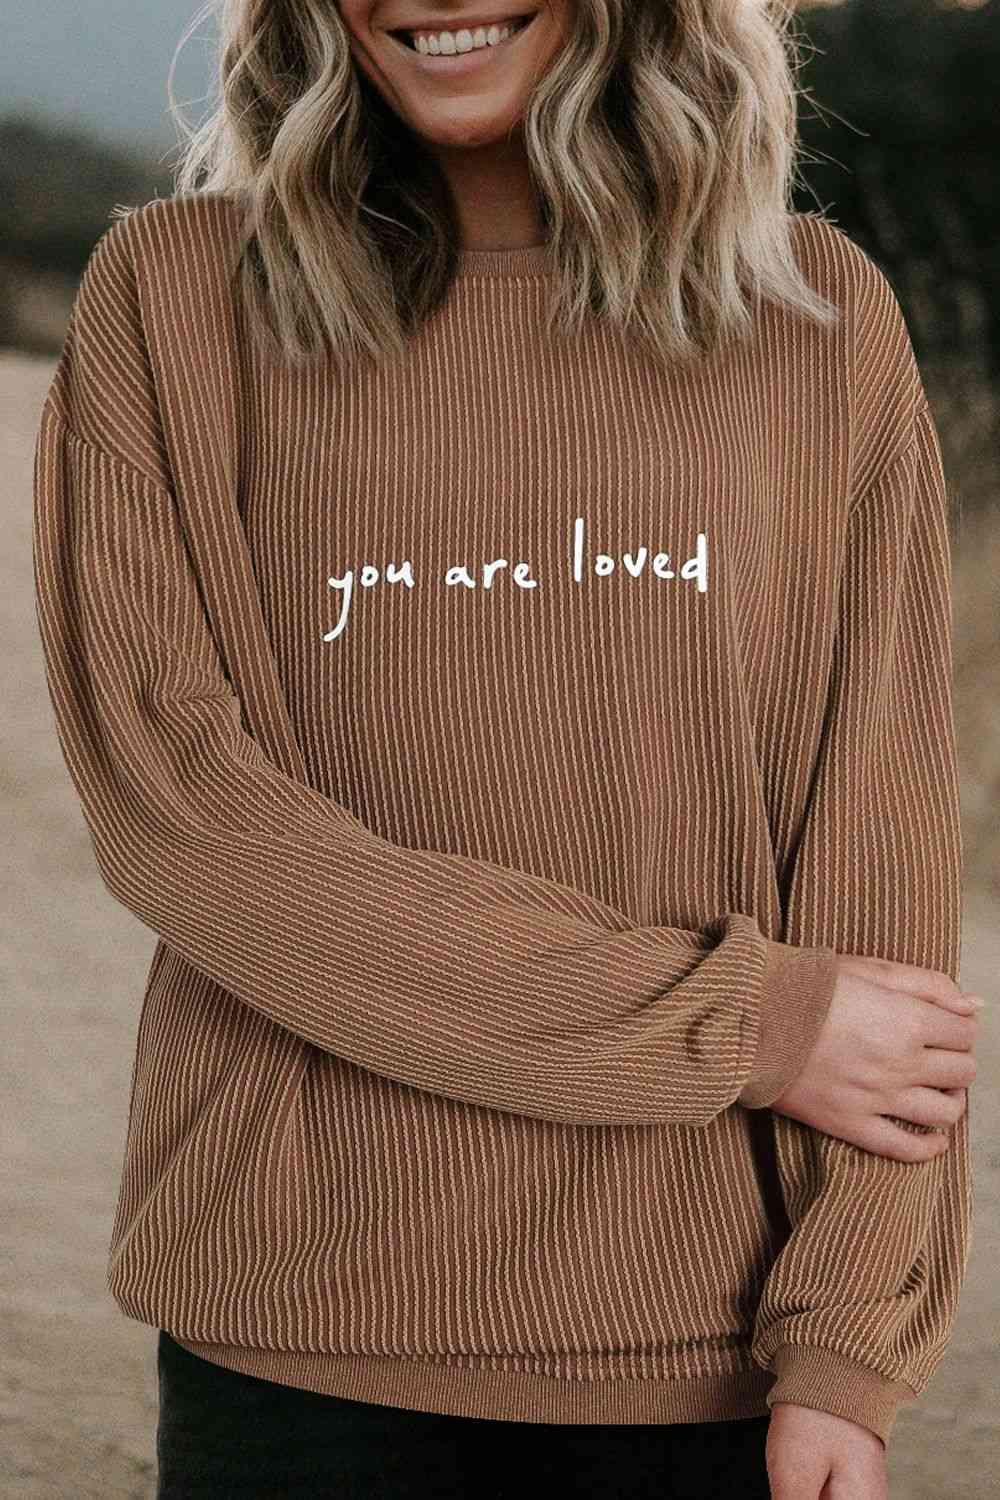 YOU ARE LOVED Graphic Dropped Shoulder Sweatshirt BLUE ZONE PLANET